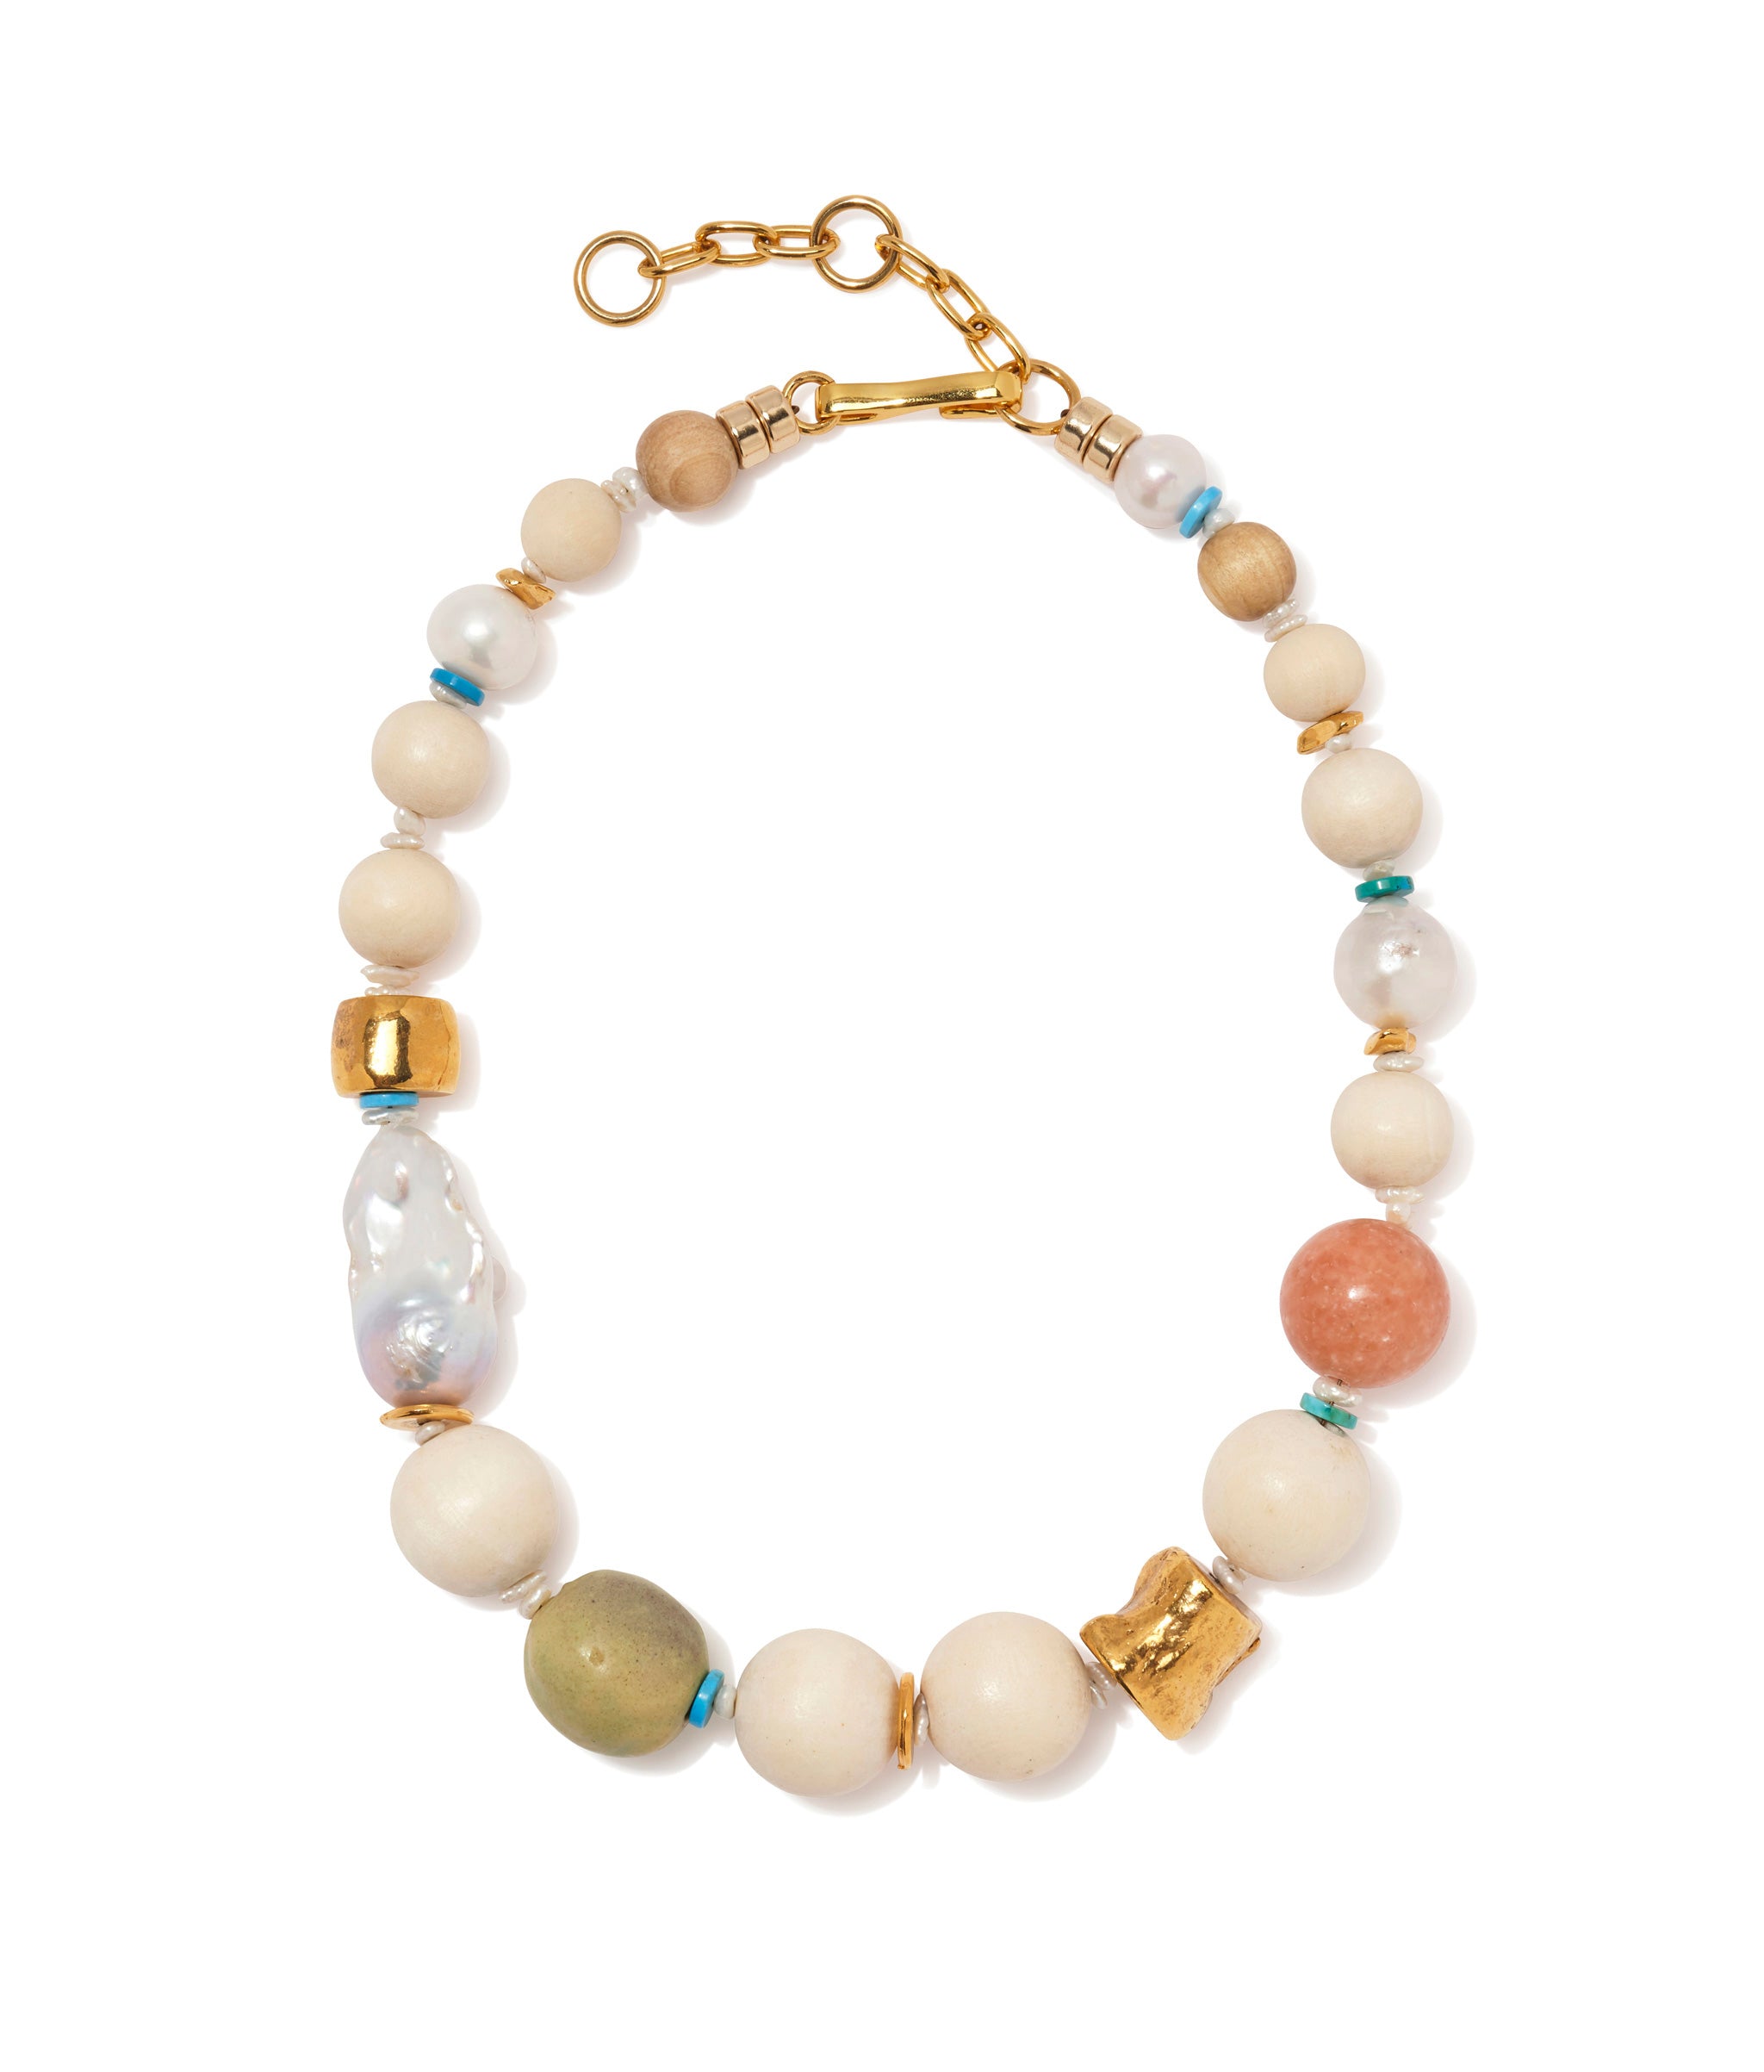 Andros Necklace. Gold-plated brass, wood, freshwater pearl, dyed howlite, ceramic, and peach calcite beads.